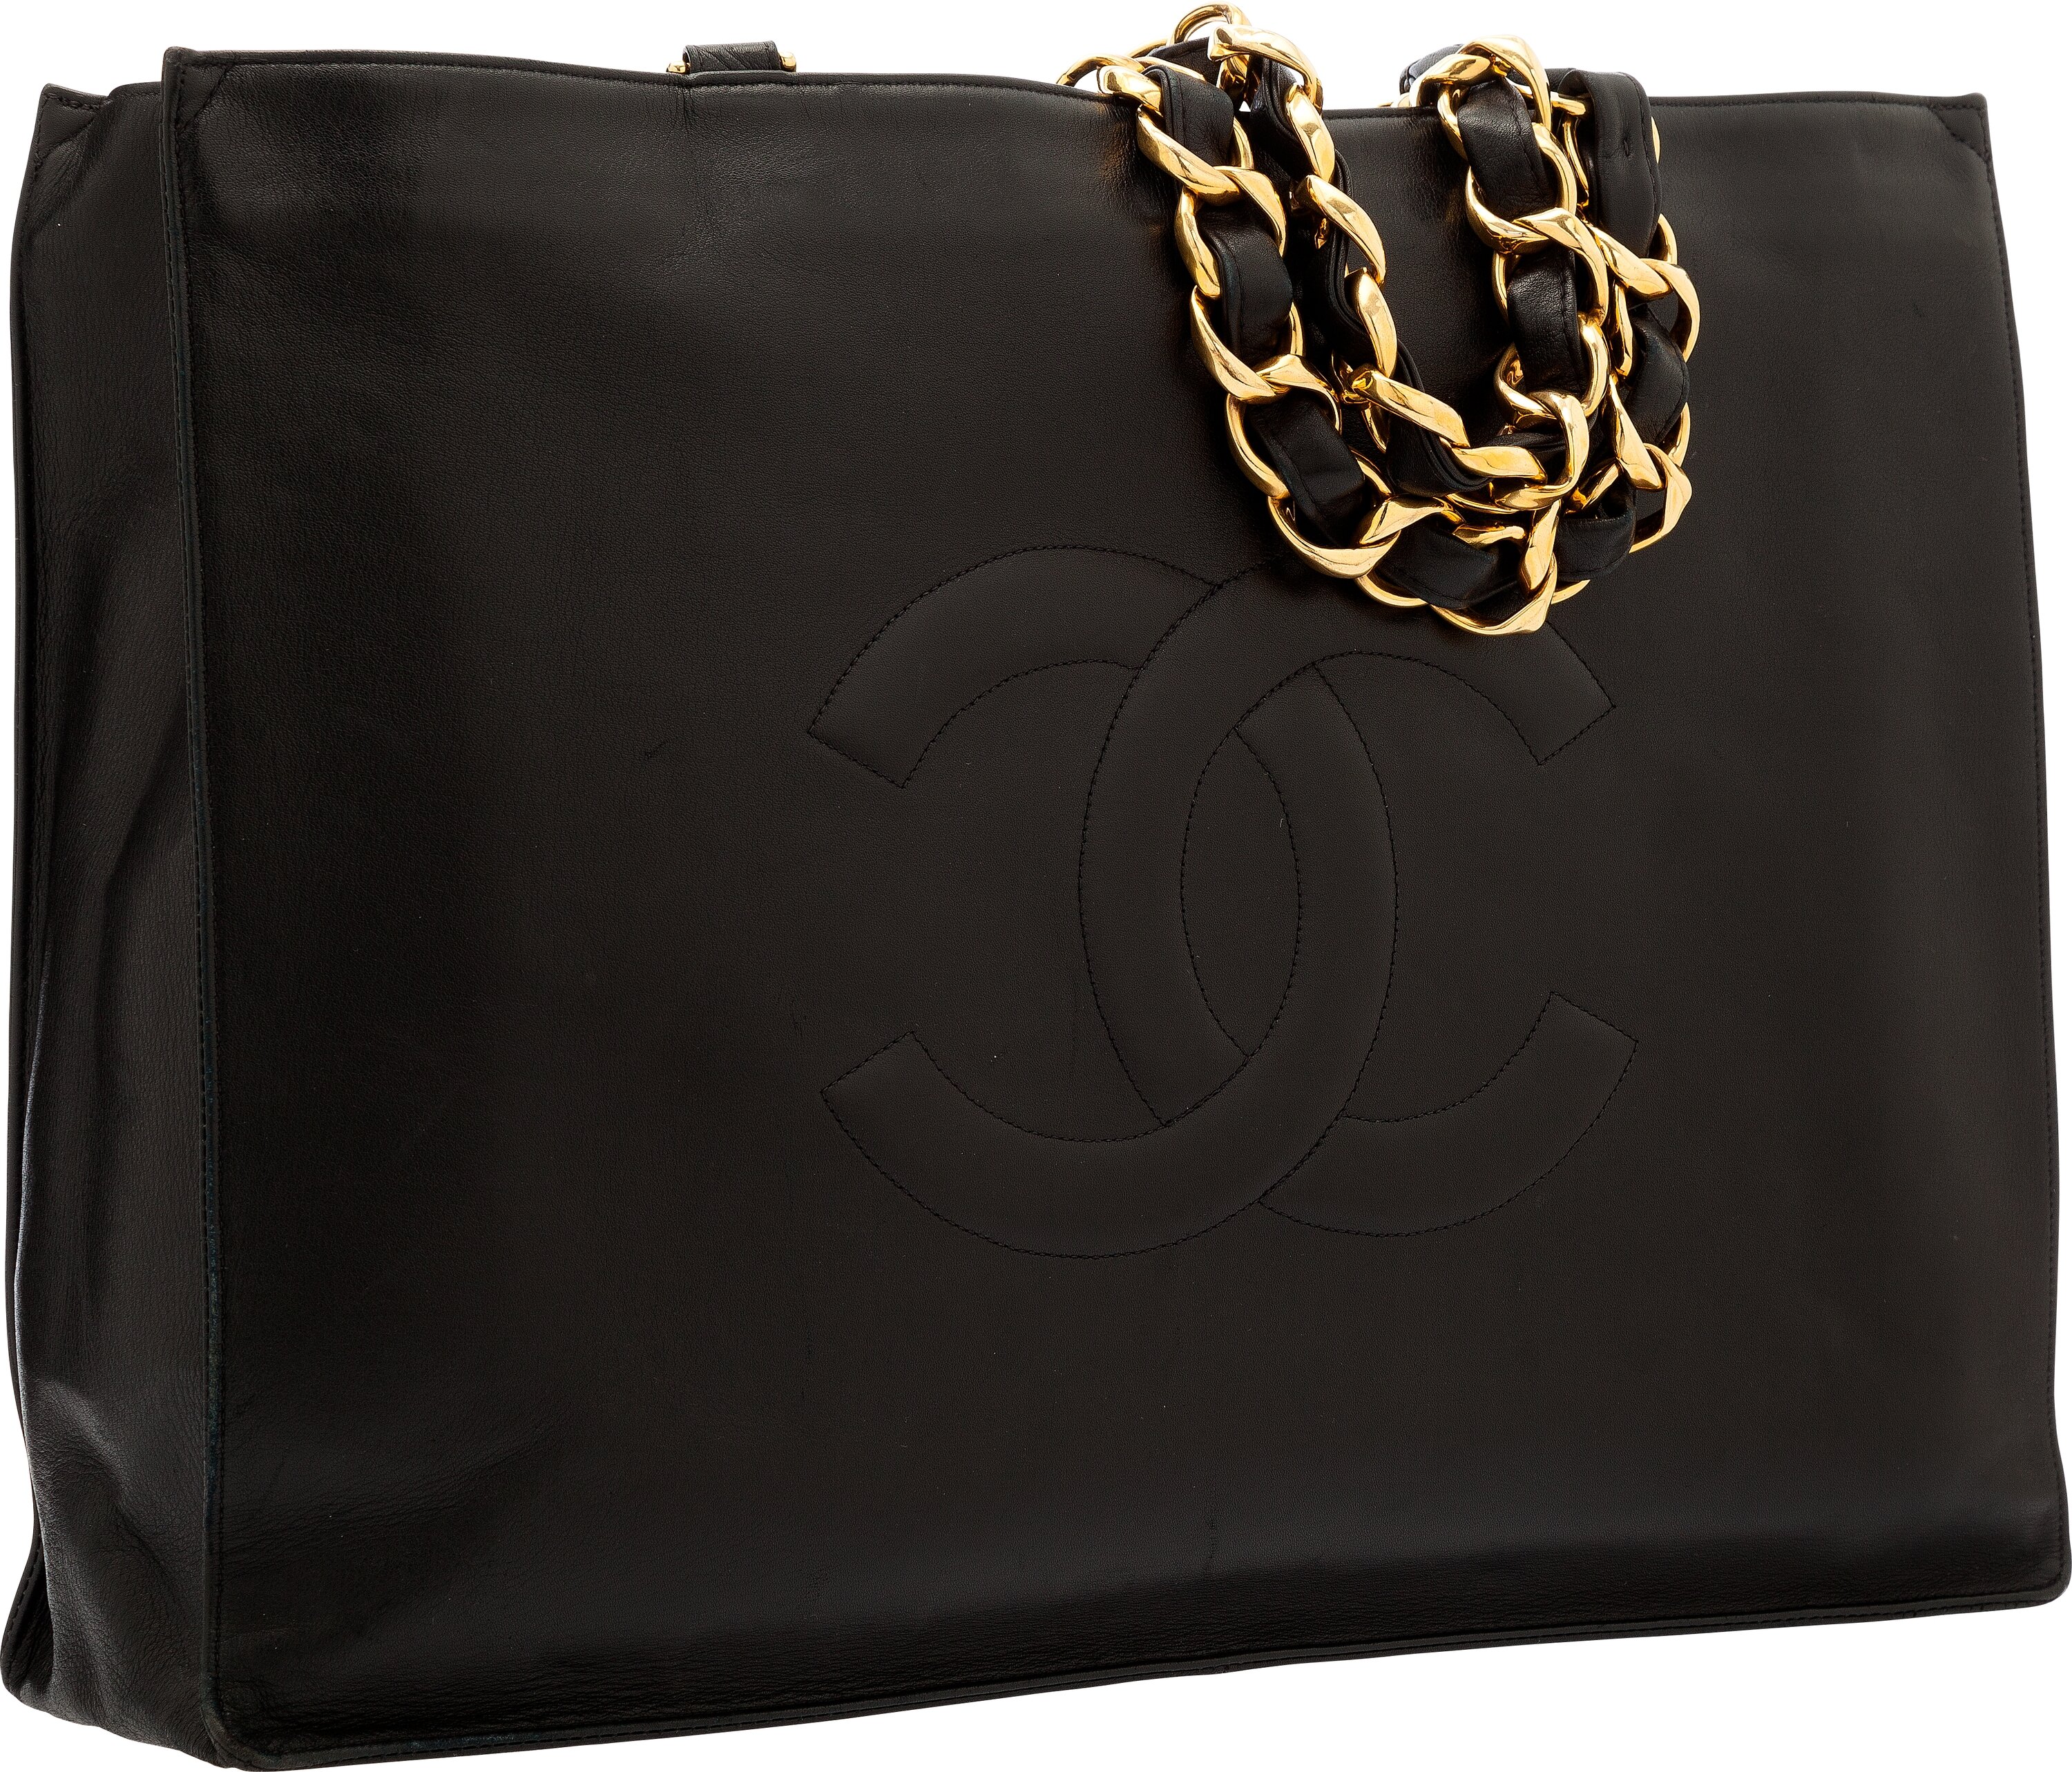 Chanel Black Lambskin Leather Large Tote Bag with Gold Hardware